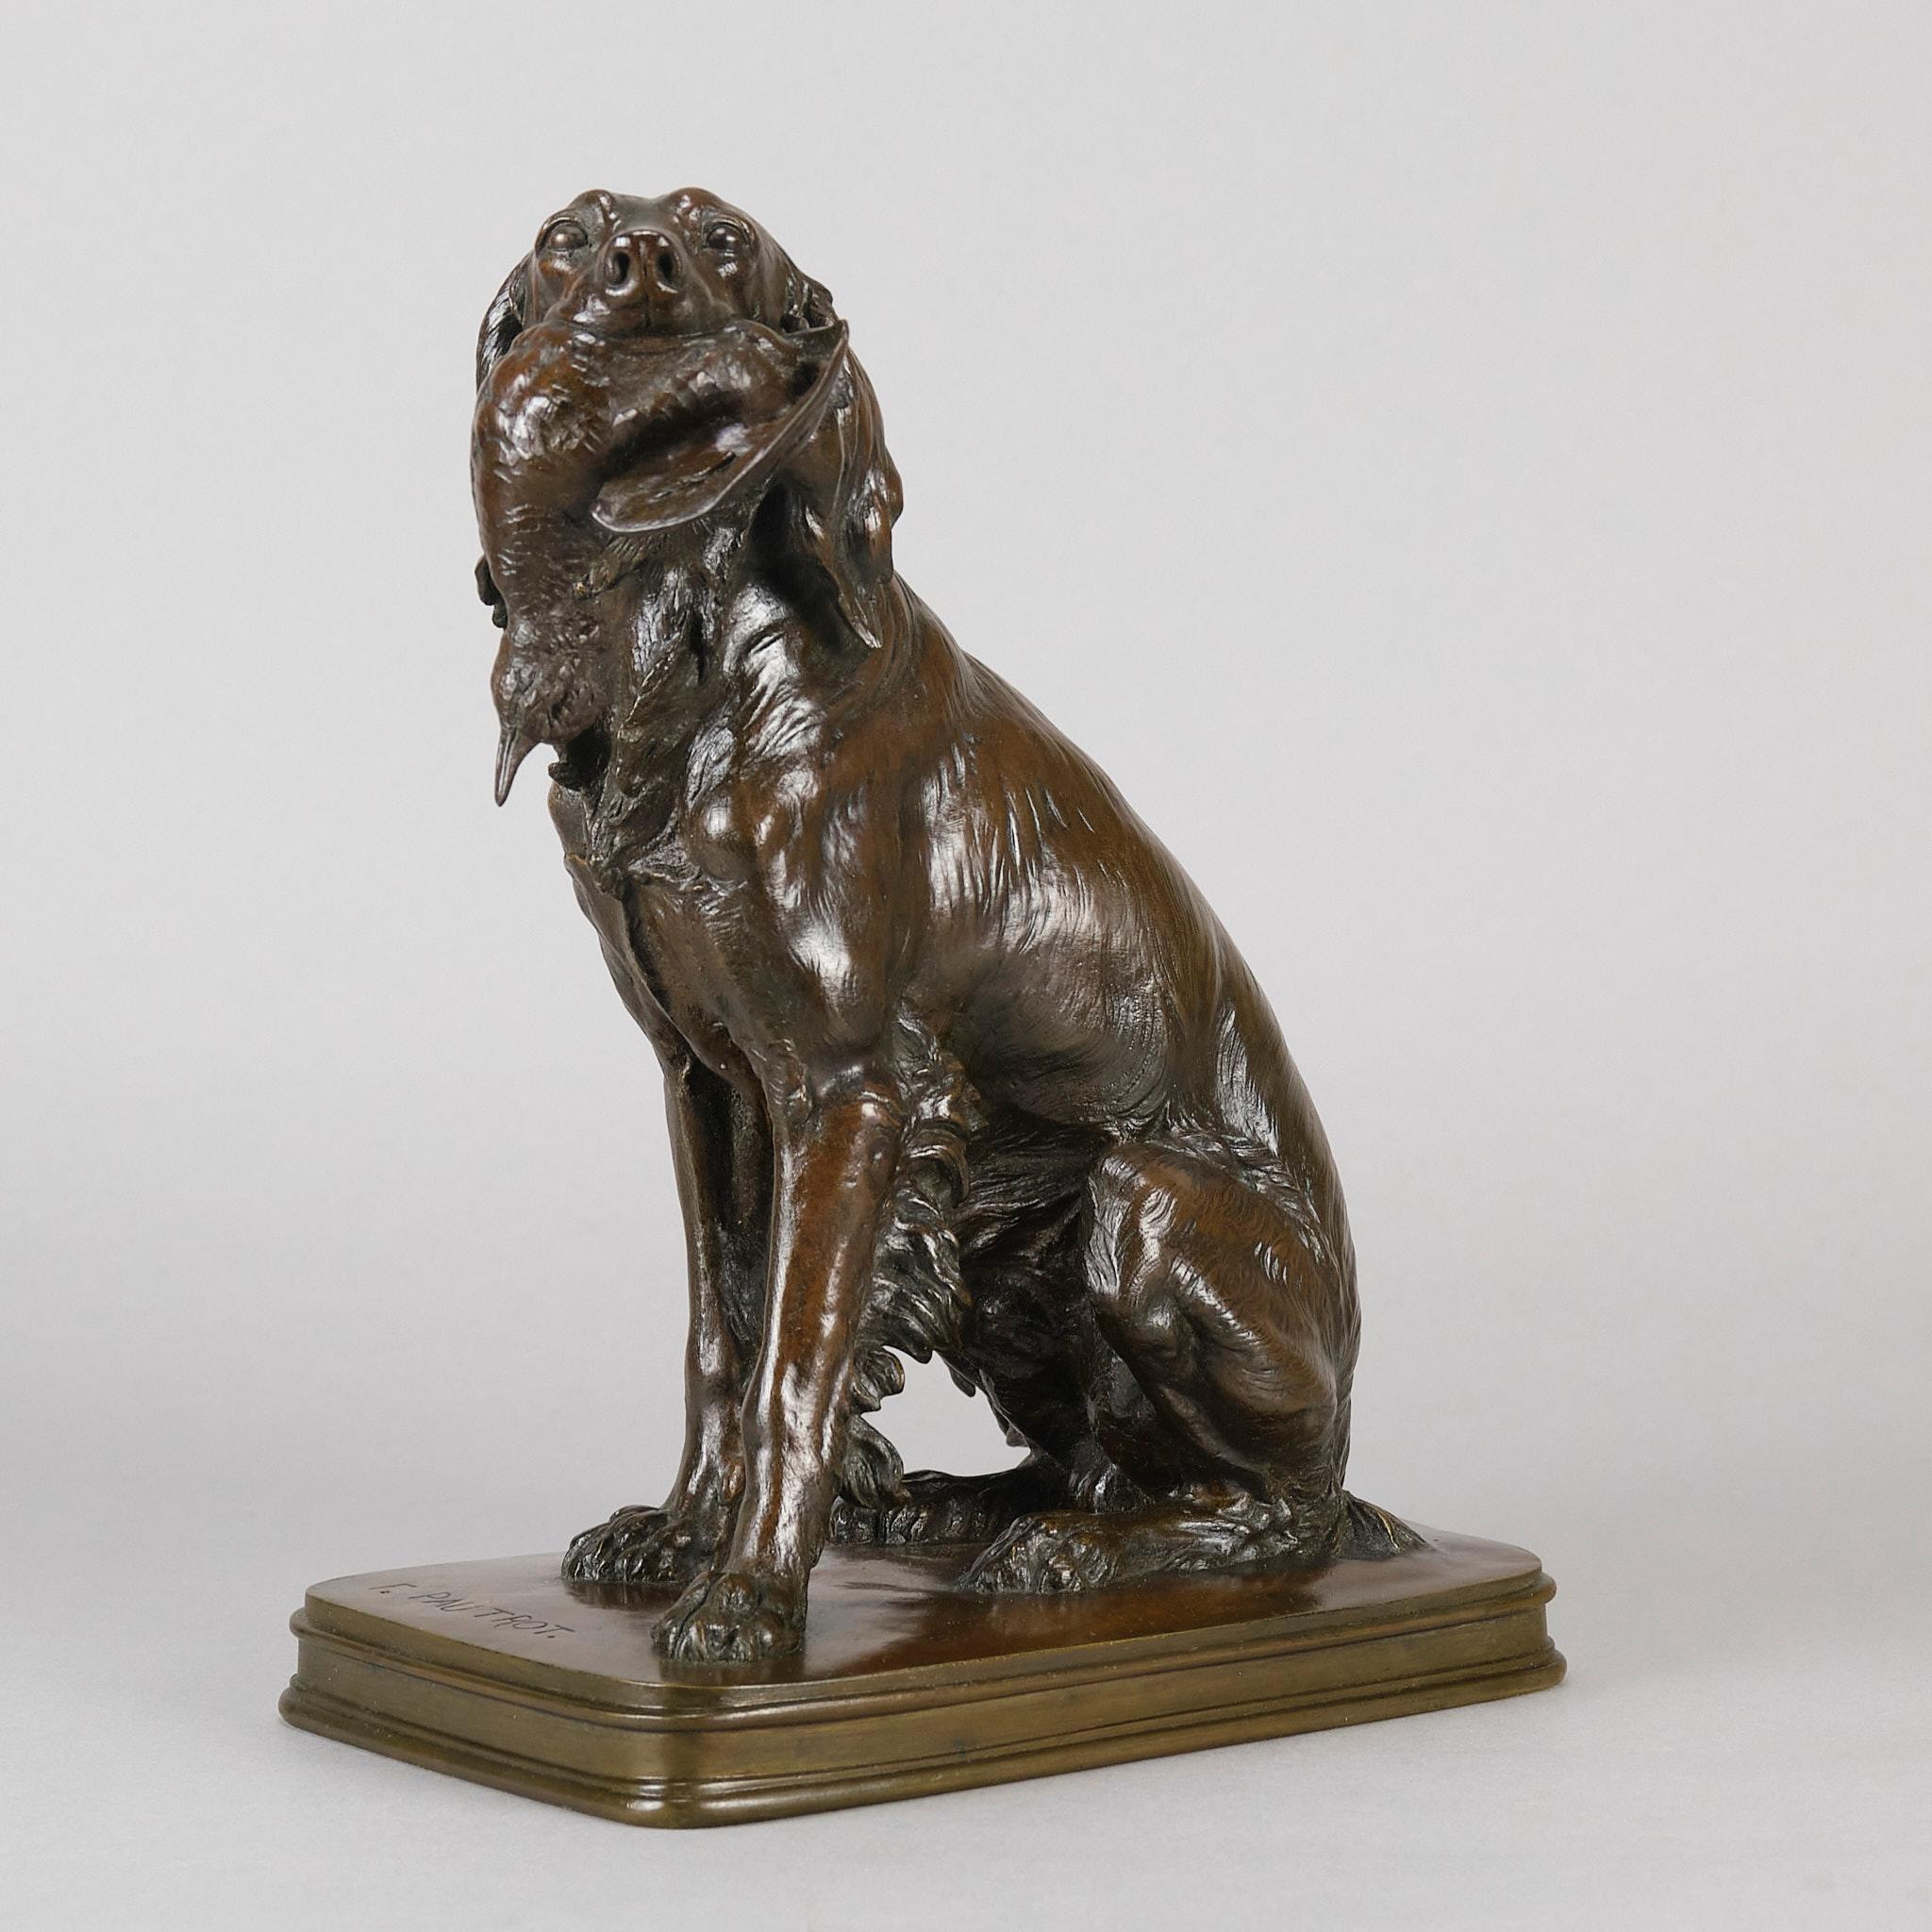 Excellent quality late 19th Century French bronze Animalier study of a seated setter holding a game bird in its mouth, with exquisite hand chased surface detail and attractive rich brown patina, signed F Pautrot

Ferdinand Pautrot ~ French, 1832 to